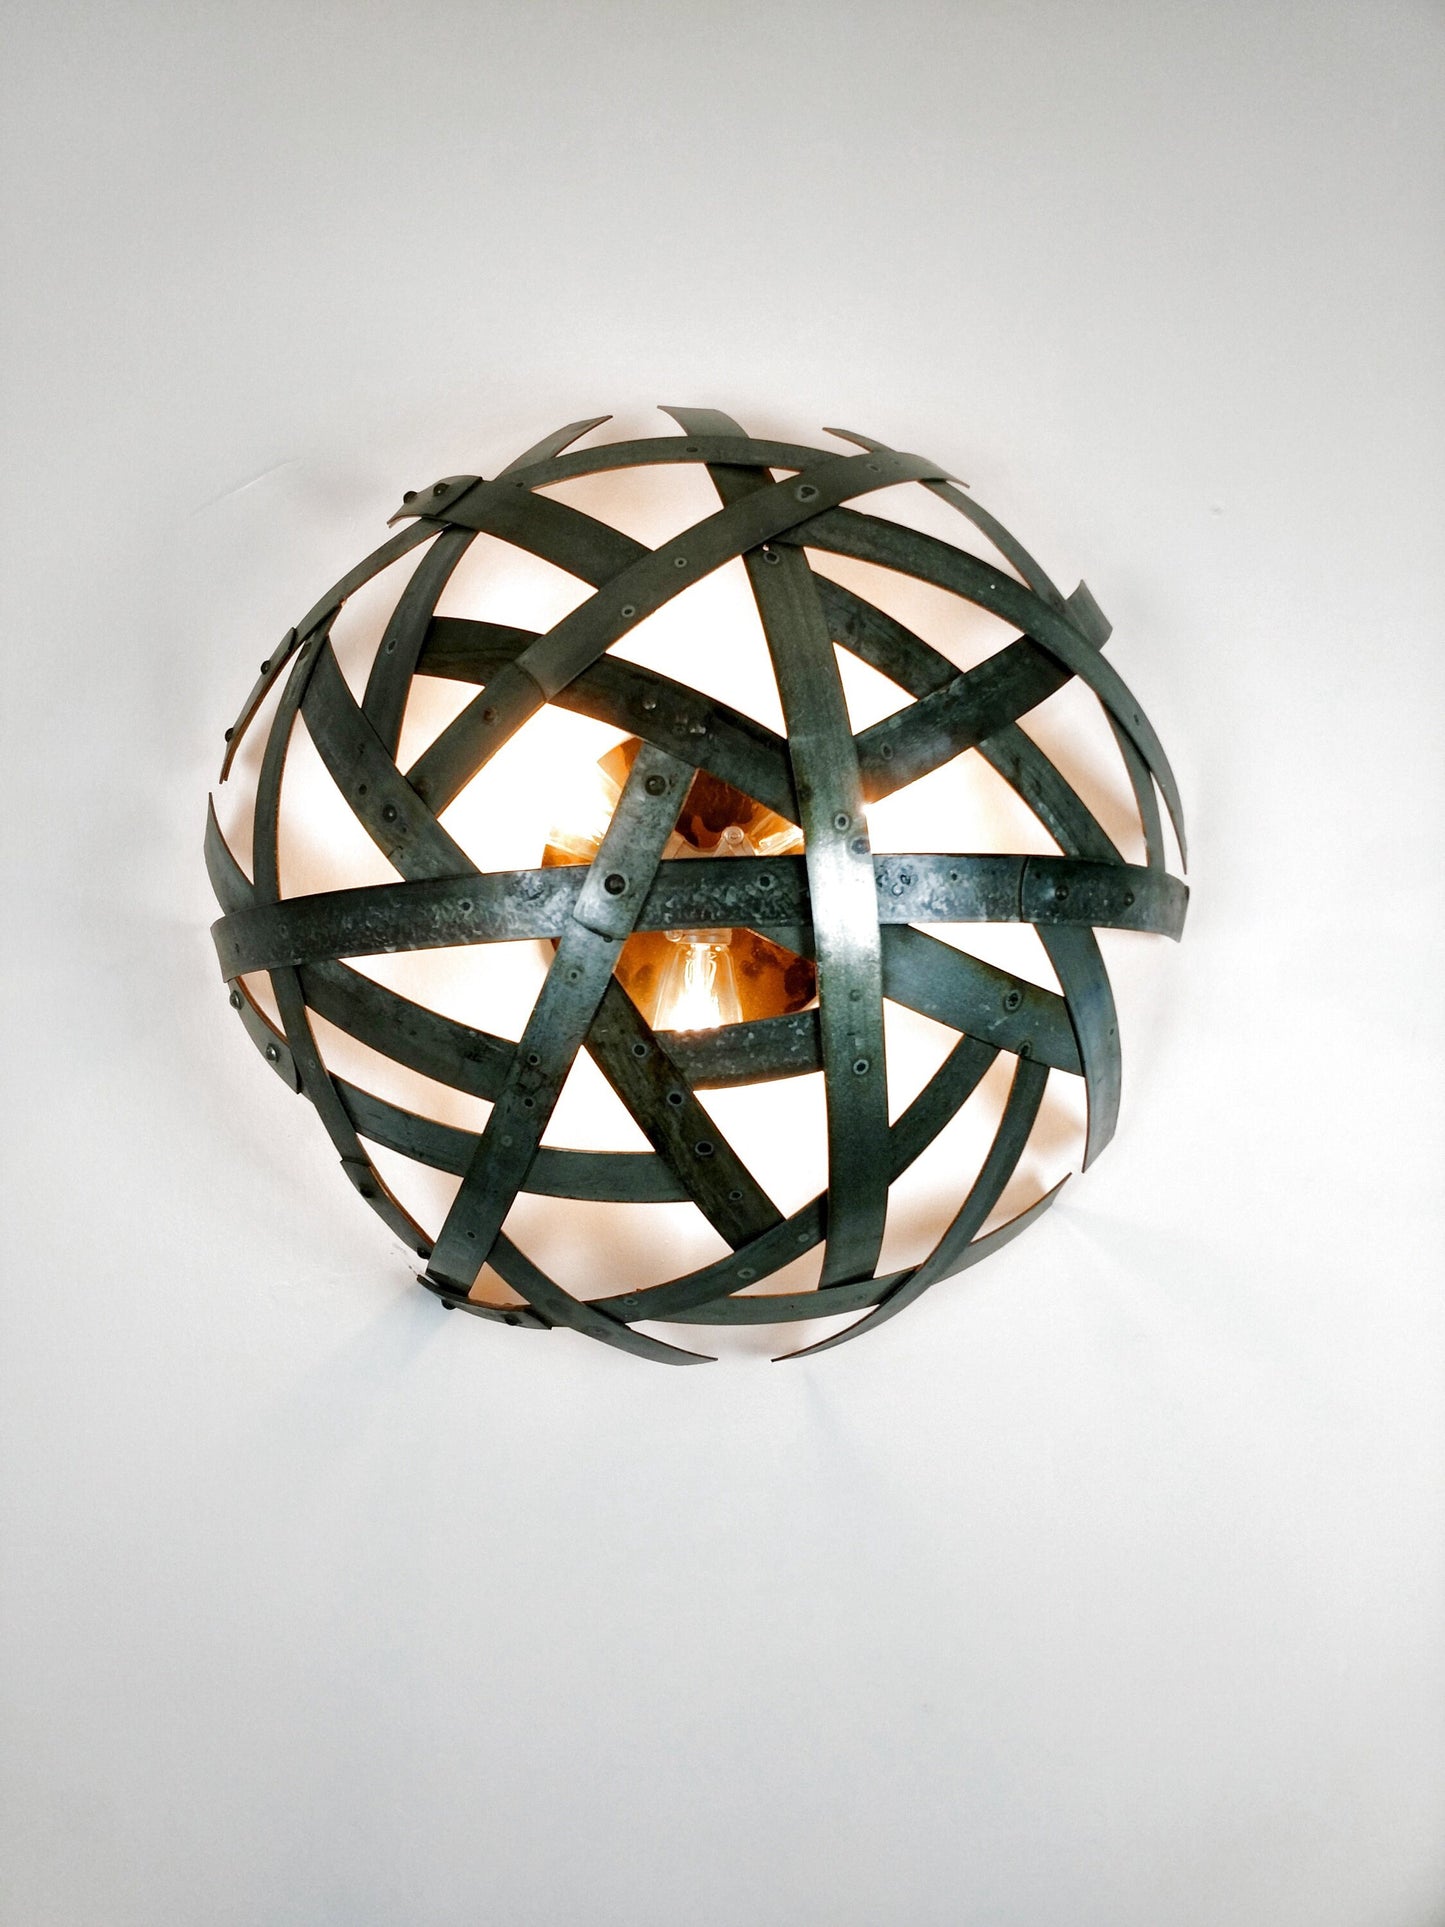 Wine Barrel Ring Sconce or Flush Mount Light - Kansi - Made from retired CA wine barrel rings. 100% Recycled!